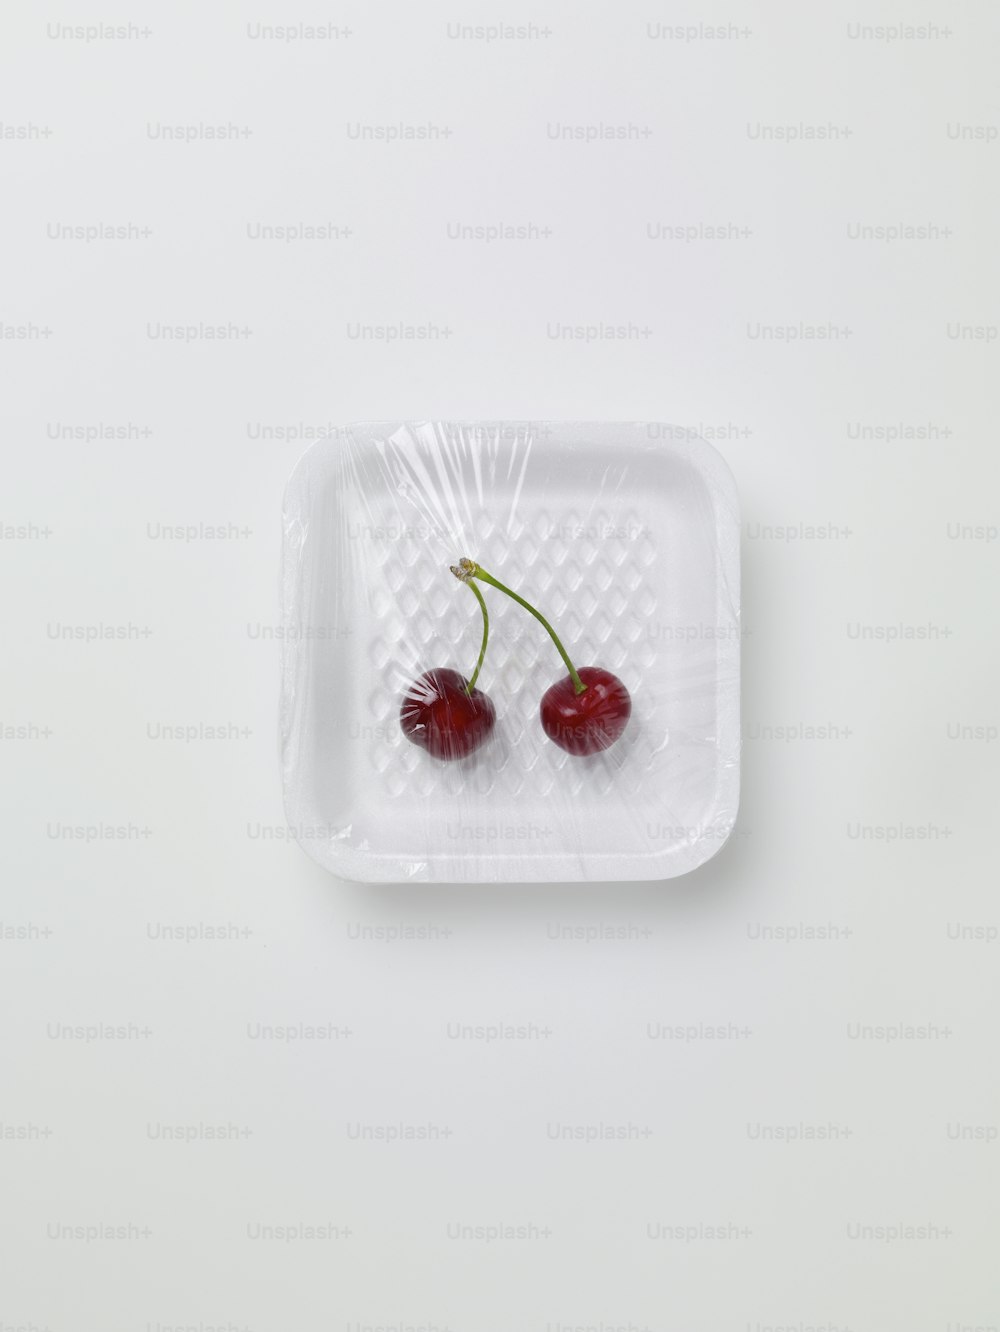 two cherries in a plastic container on a white surface